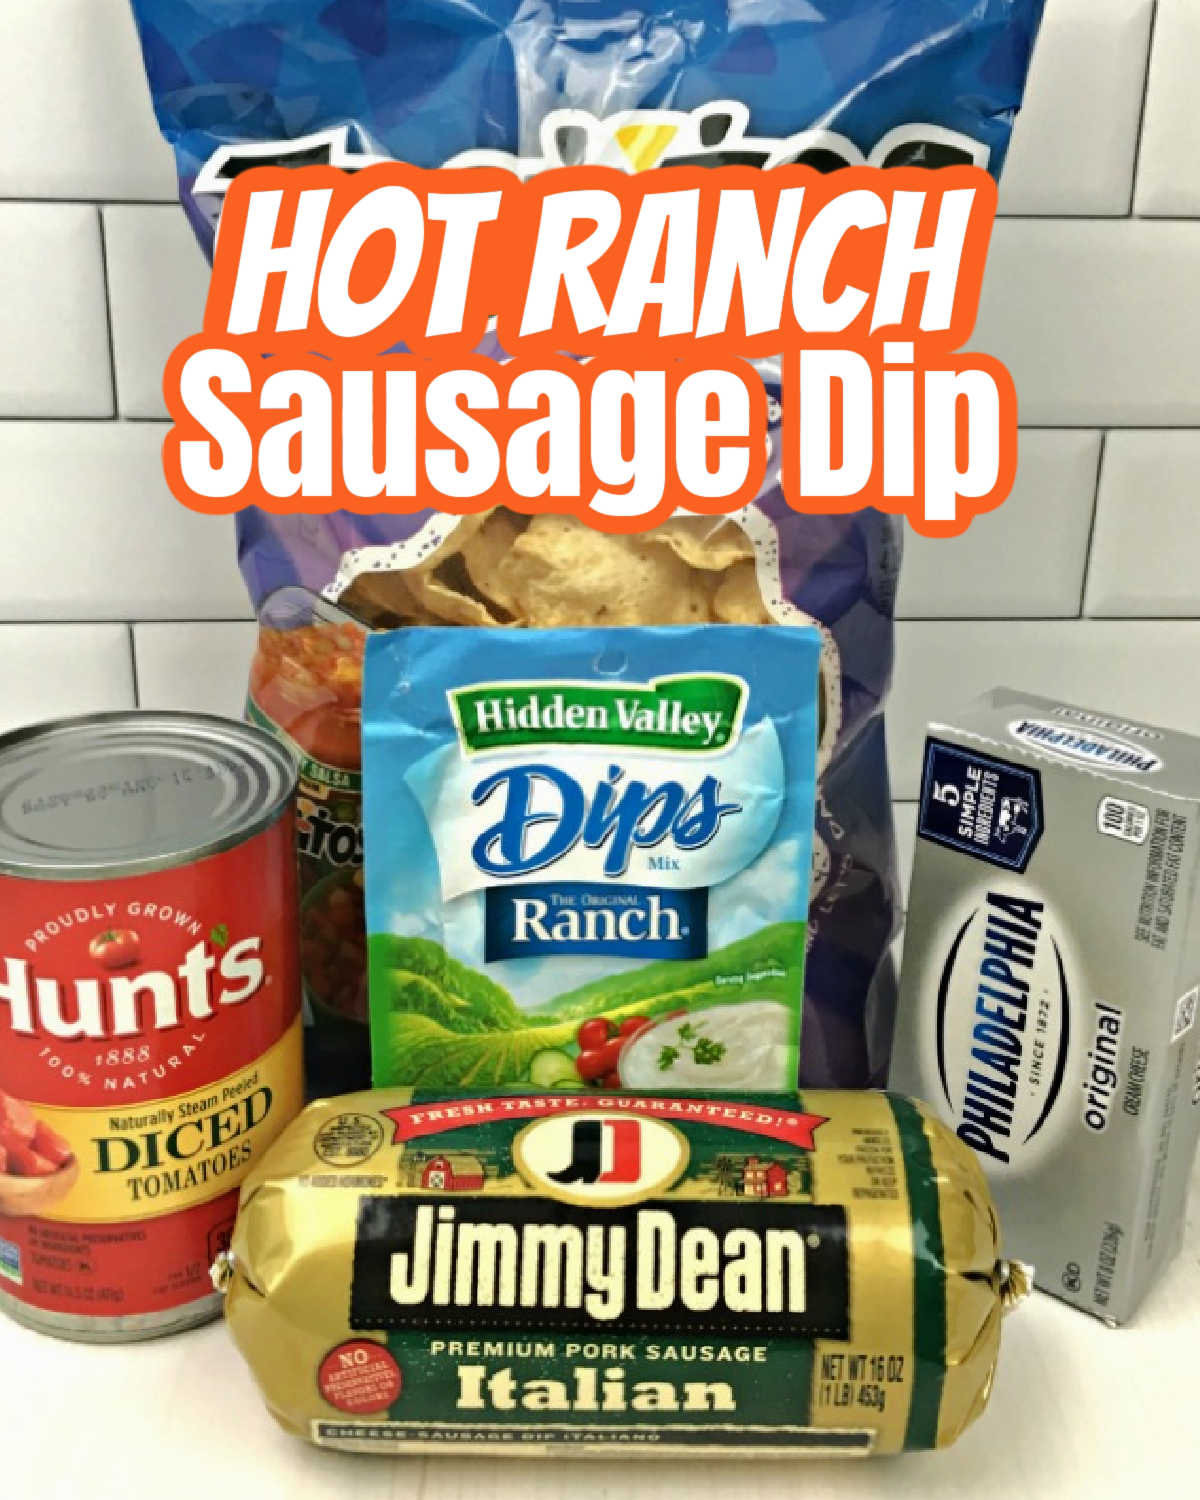 This photo shows the ingredients to make Hot Ranch Sausage Dip - packet of ranch dip mix, block of cream cheese, can of diced tomatoes and Italian sausage. Behind the ingredients is a bag of tortilla chips.